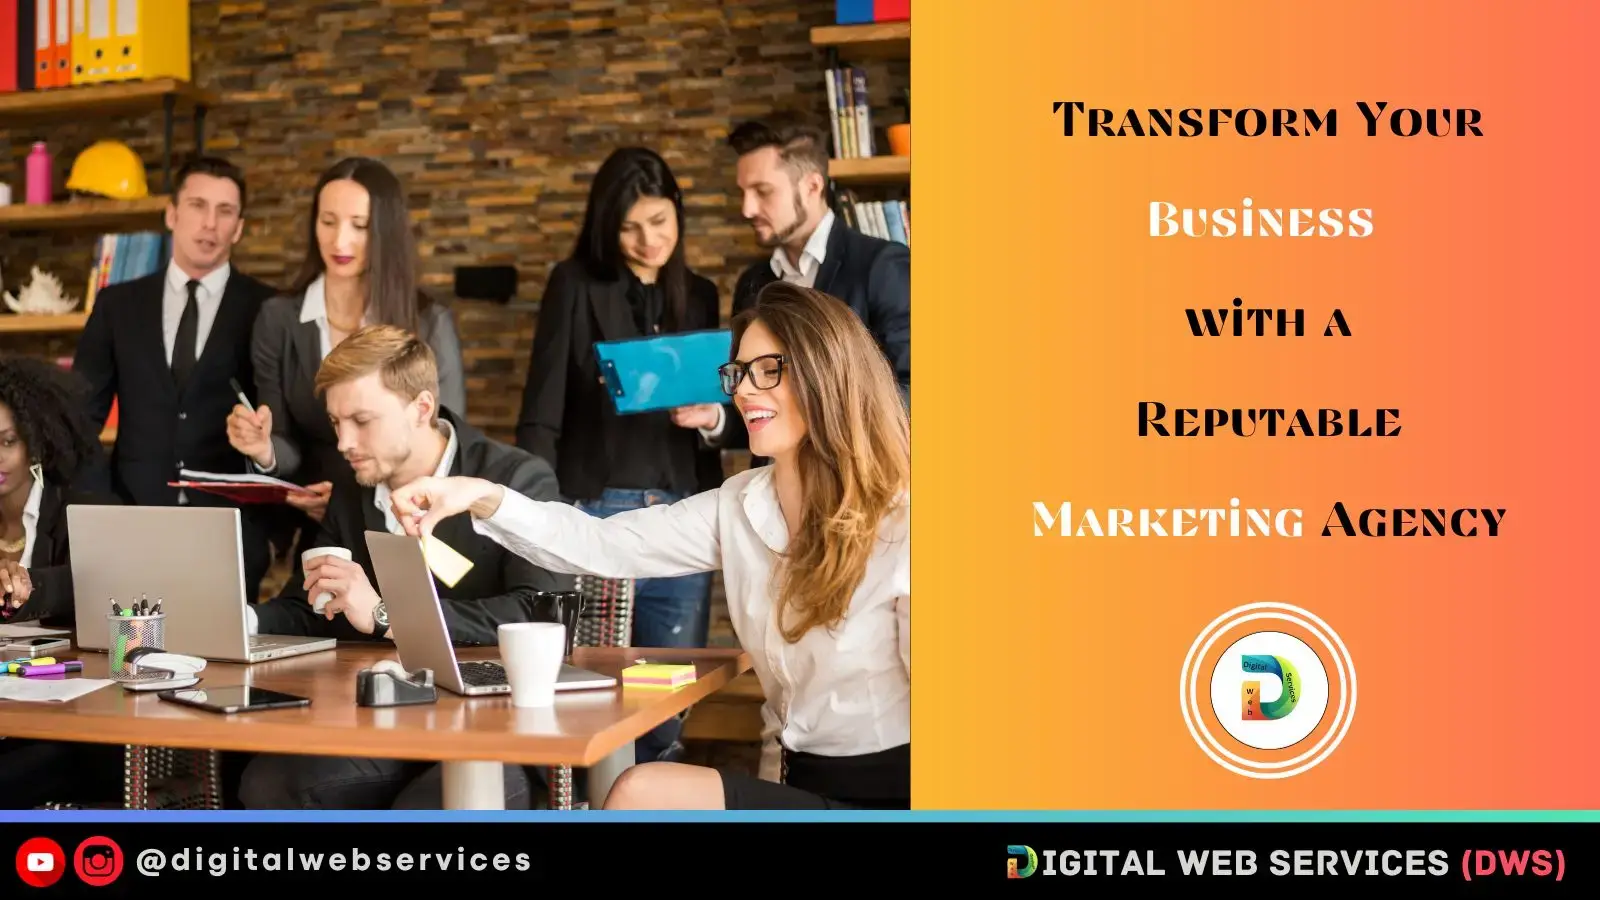 Transform Your Business with a Reputable Marketing Agency